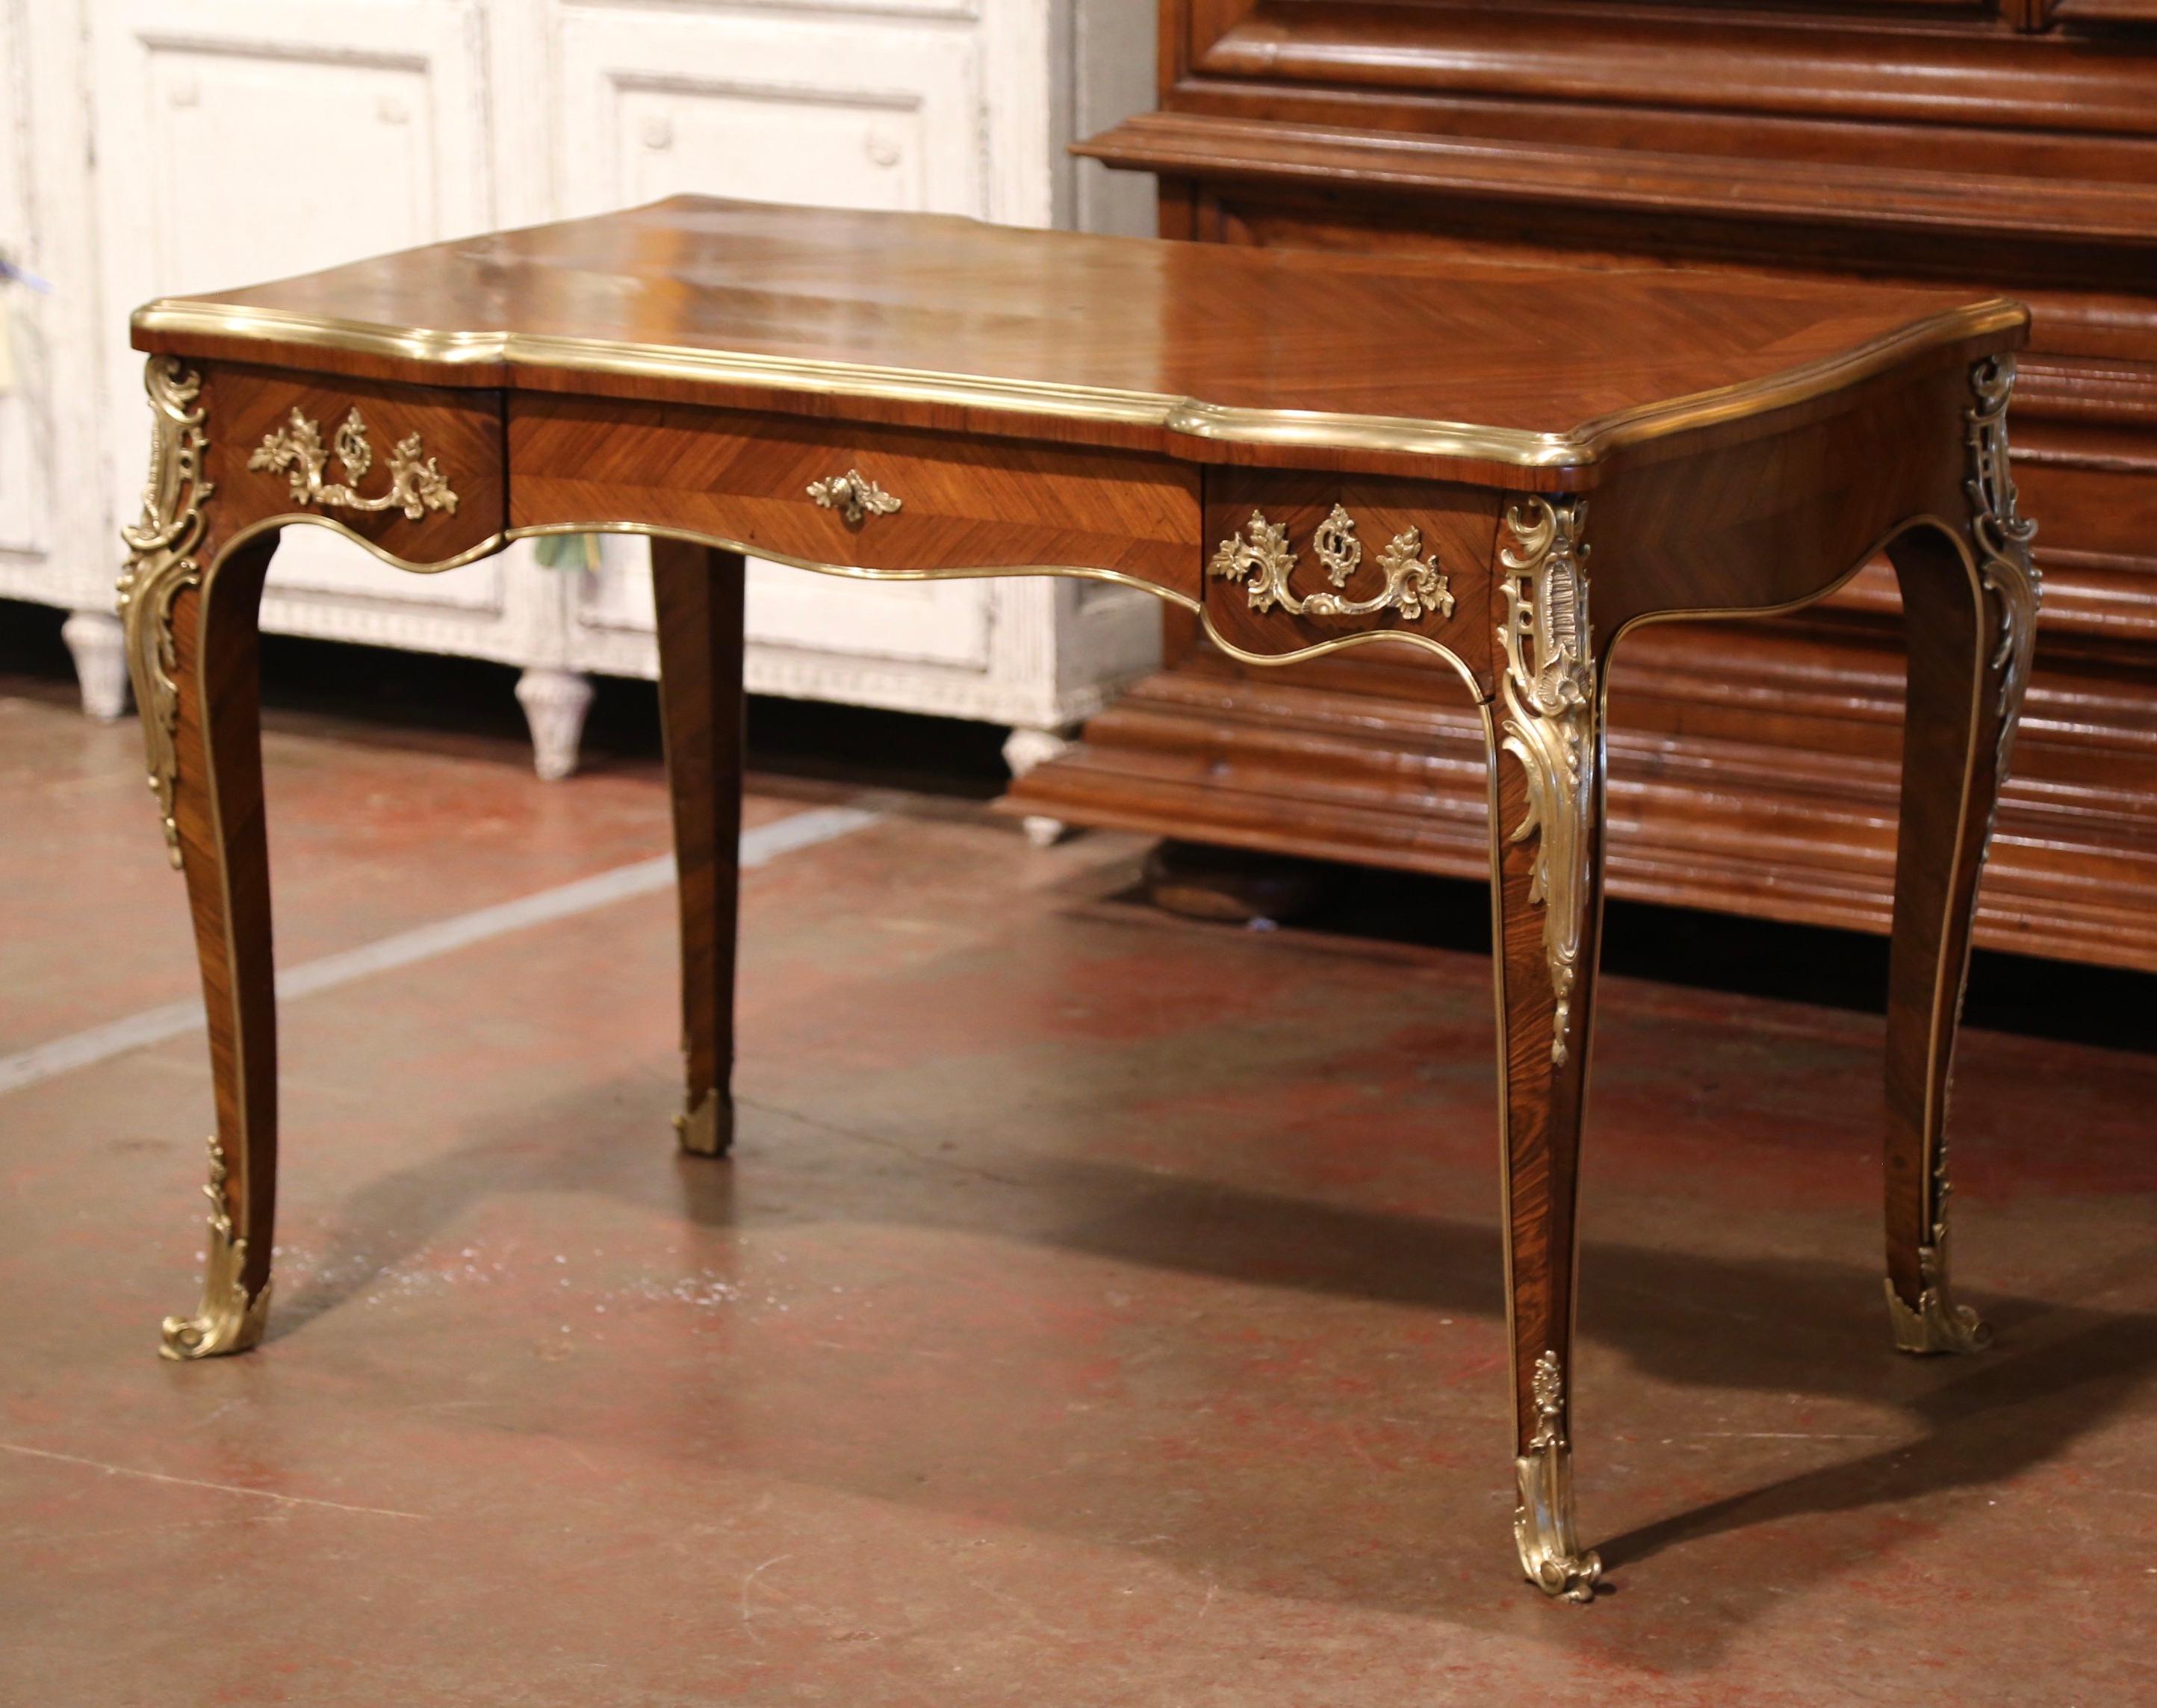 This elegant antique table was crafted in France, circa 1870. Bombe in shape, the fruit wood writing table stands on cabriole legs decorated by large bronze dore acanthus leaves mounts at the shoulders, and terminating with gilt bronze sabot feet.